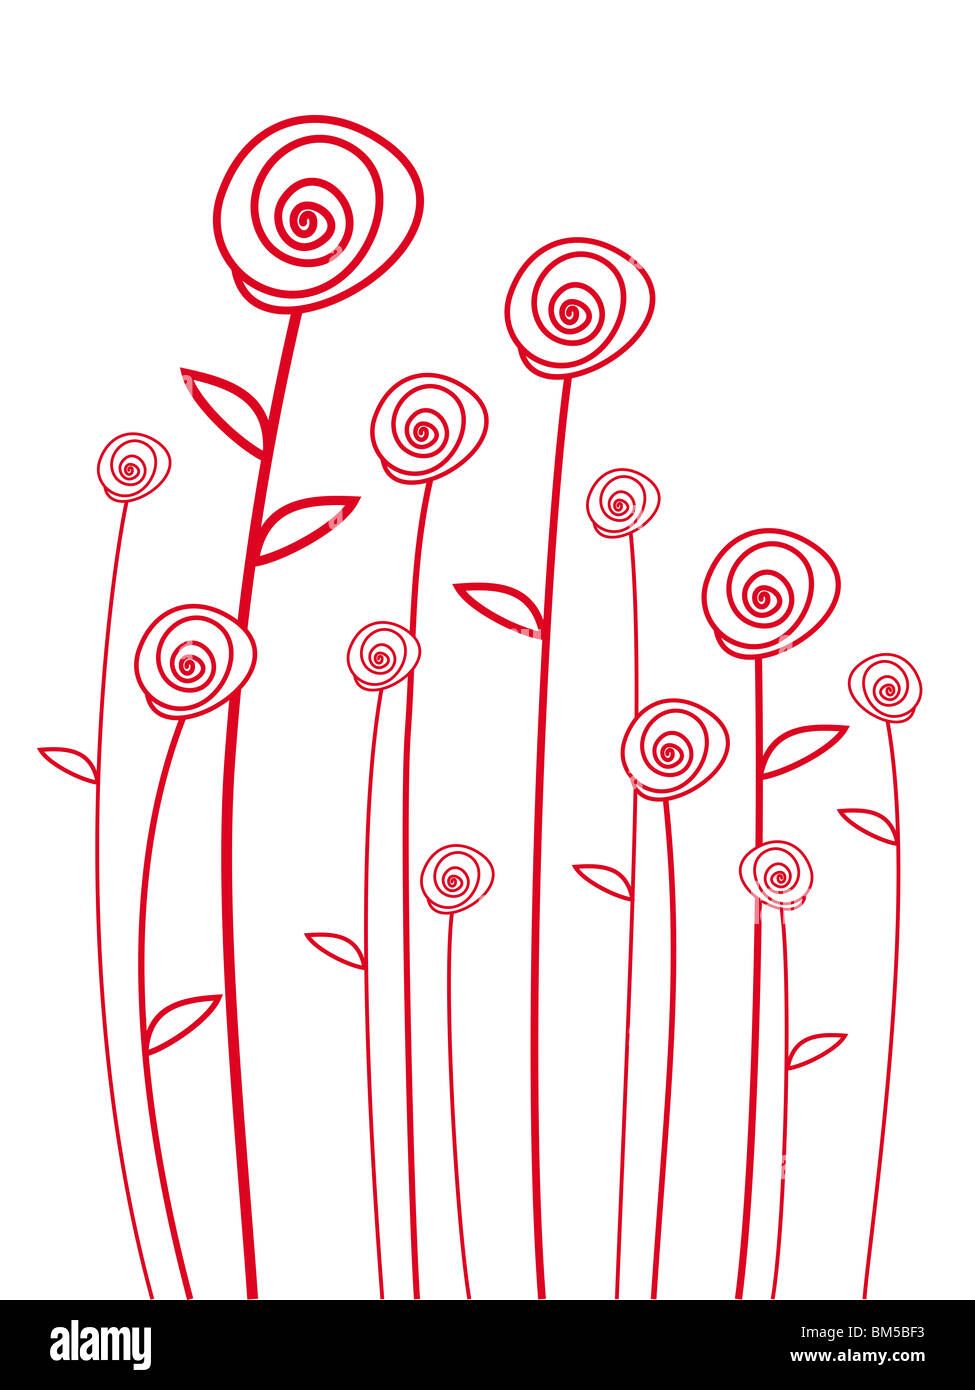 red roses, scribble drawing Stock Photo - Alamy